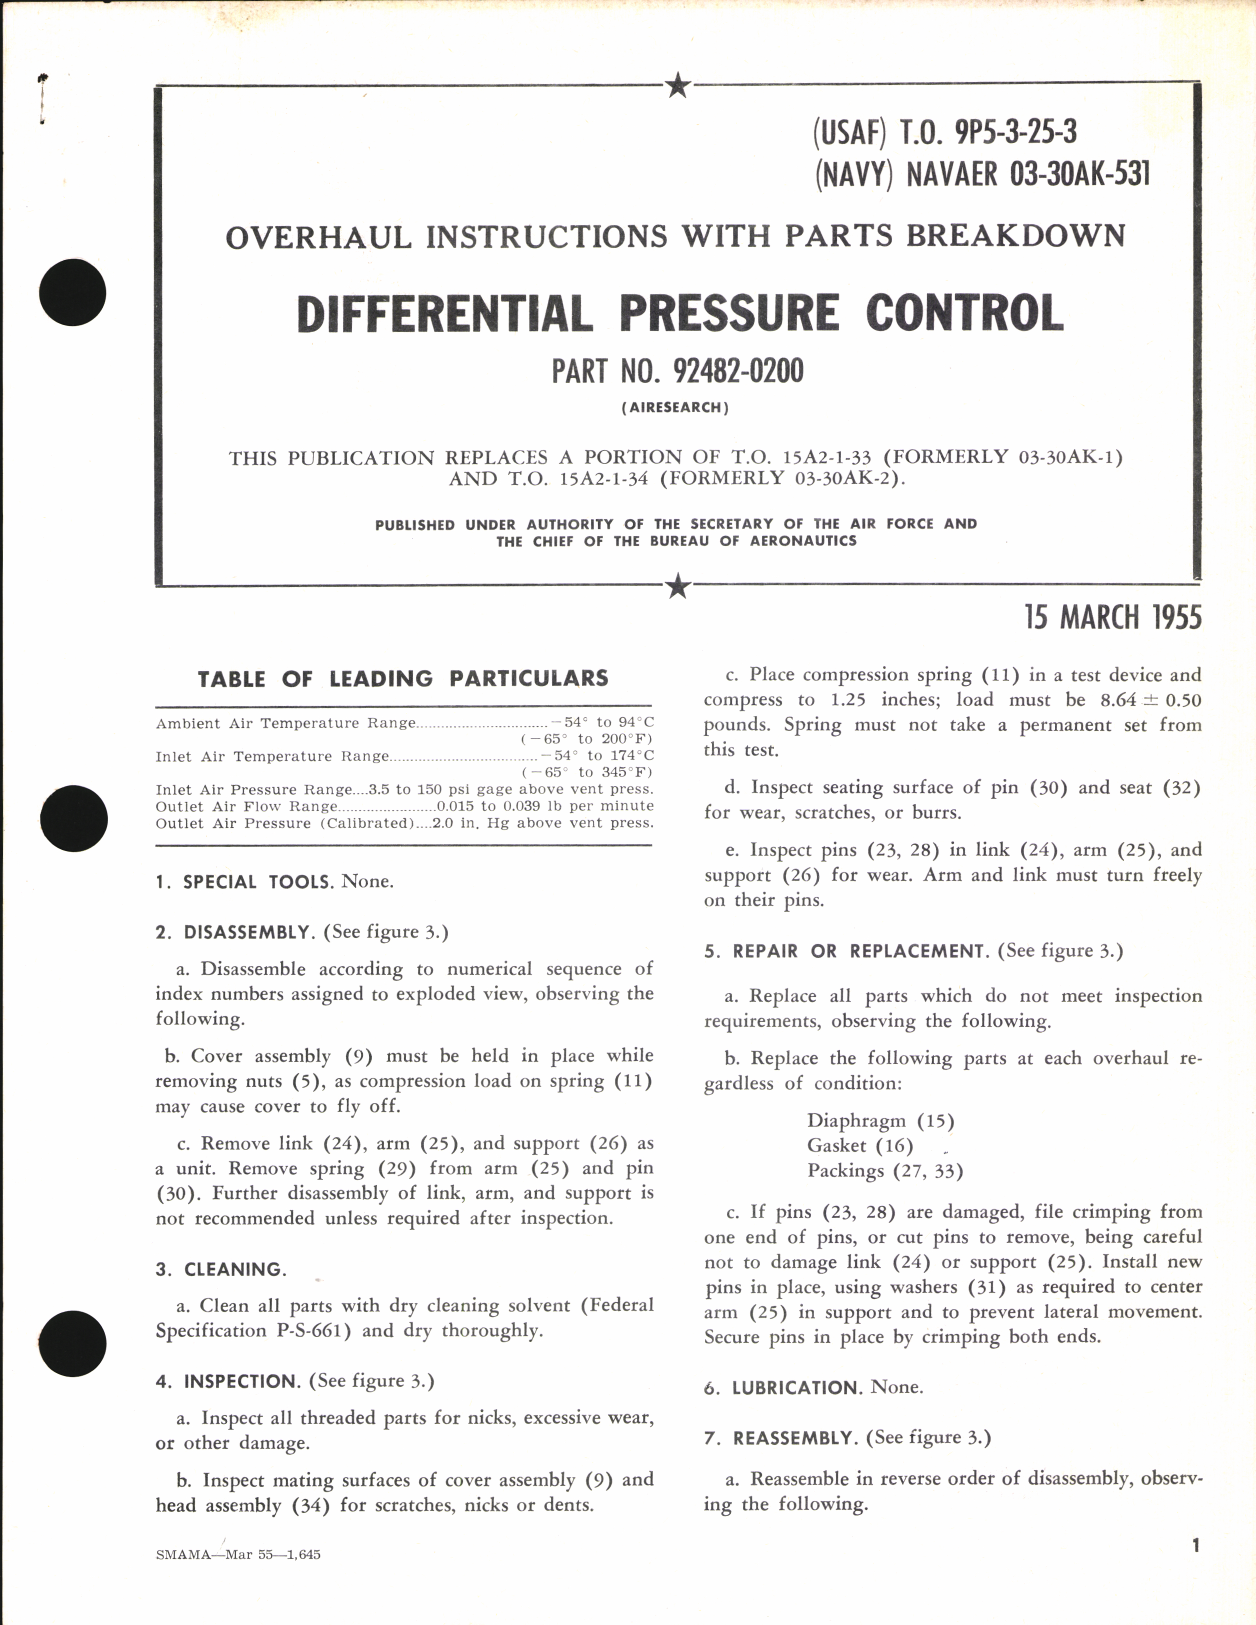 Sample page 1 from AirCorps Library document: Overhaul Instructions with Parts Breakdown for Differential Pressure Control Part no. 92482-0200